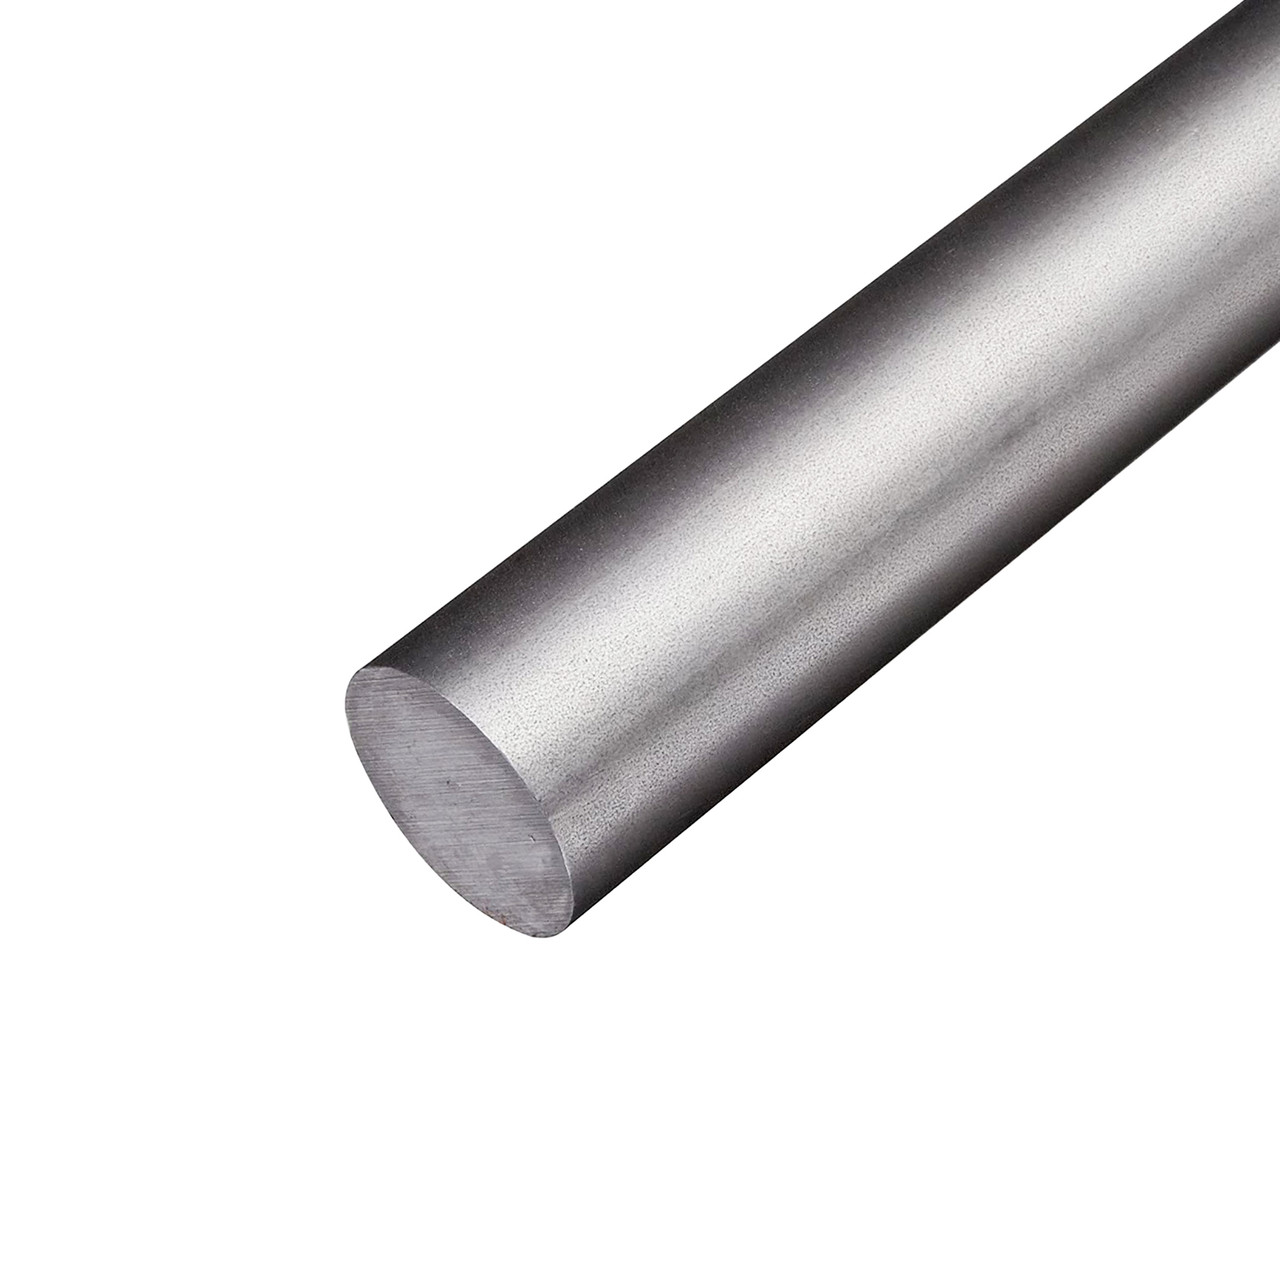 0.812 (13/16 inch) x 24 inches, 8620 Alloy Steel Round Rod, Cold Finished